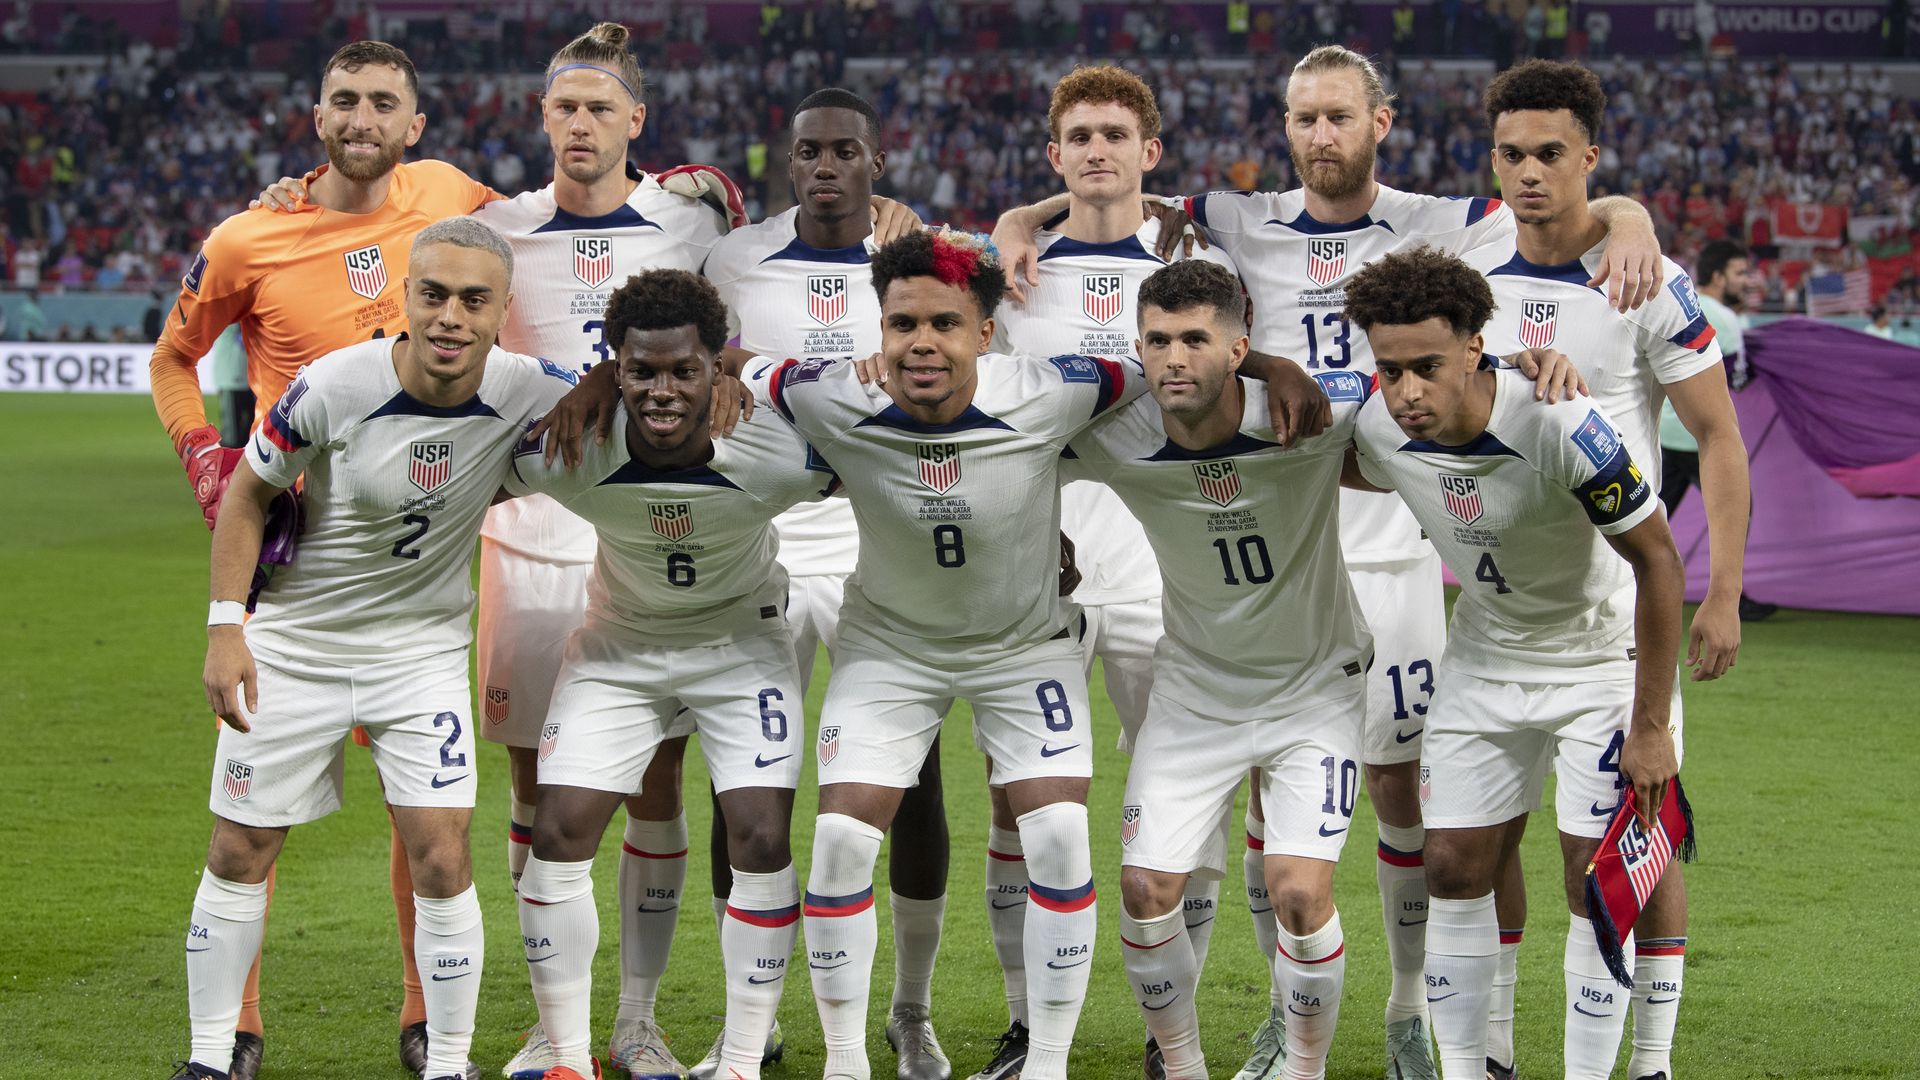 The U.S. men's national soccer team before their World Cup match. 